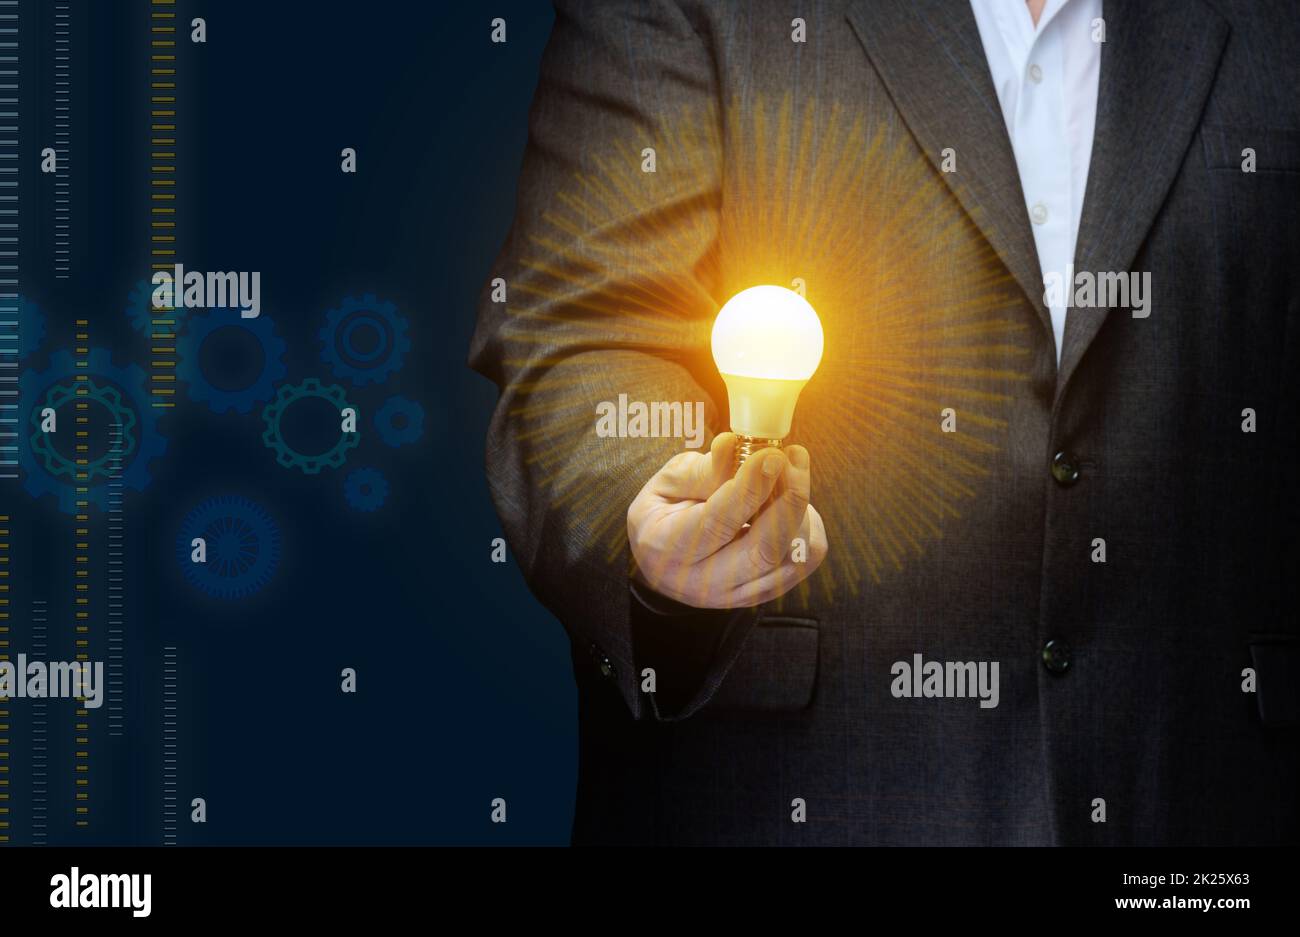 A businessman holds an electric lamp in his hand on a dark blue background. Concept of new ideas in business, innovation Stock Photo